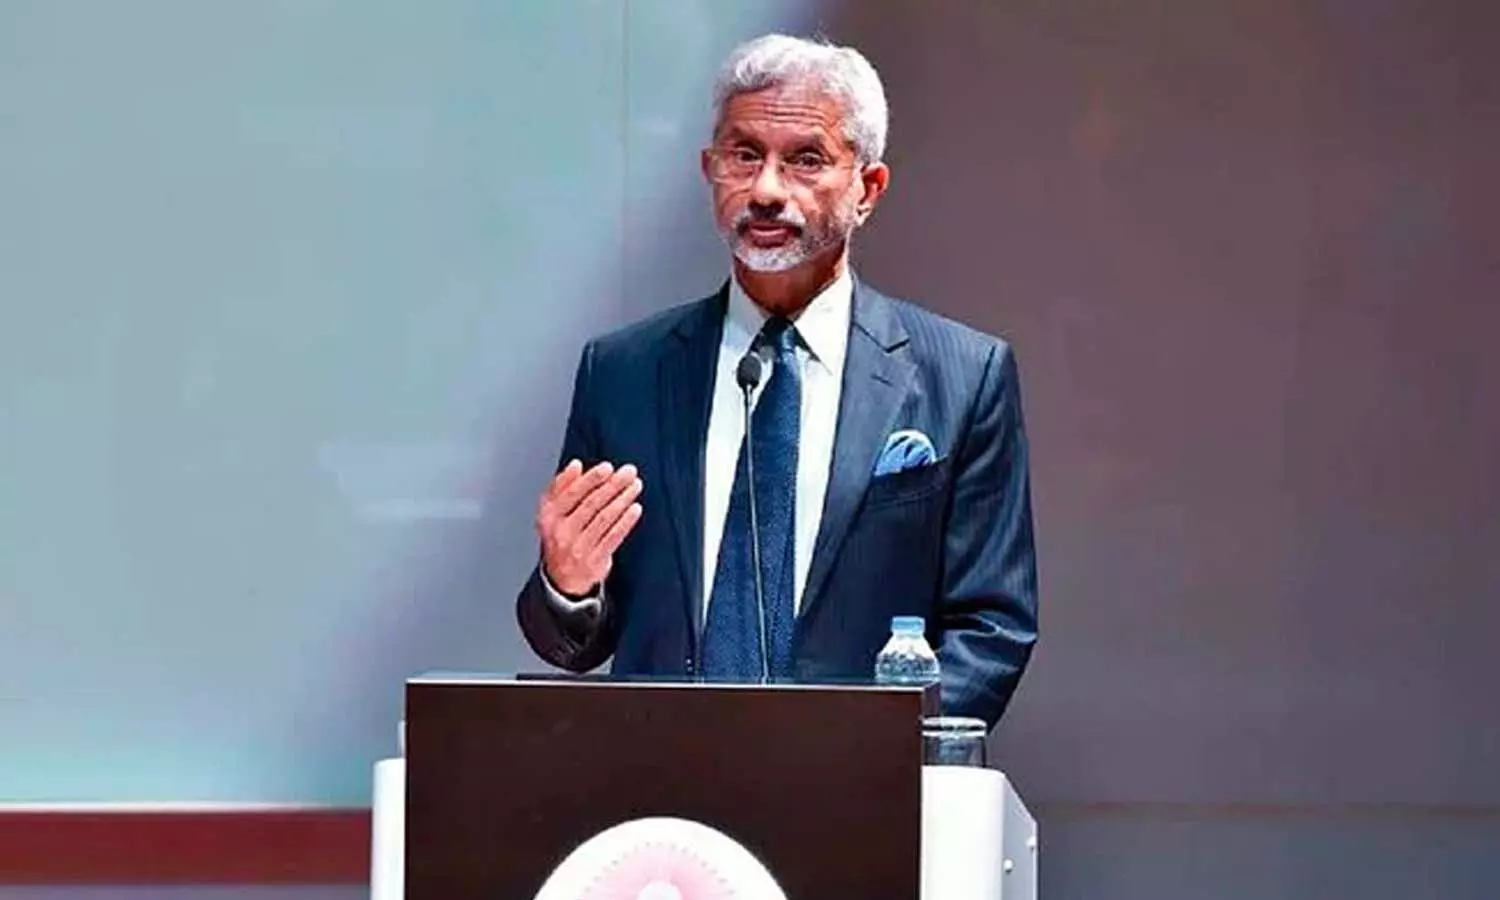 BHU will play a big role in making India a superpower, Foreign Minister S. Jaishankar said a big thing